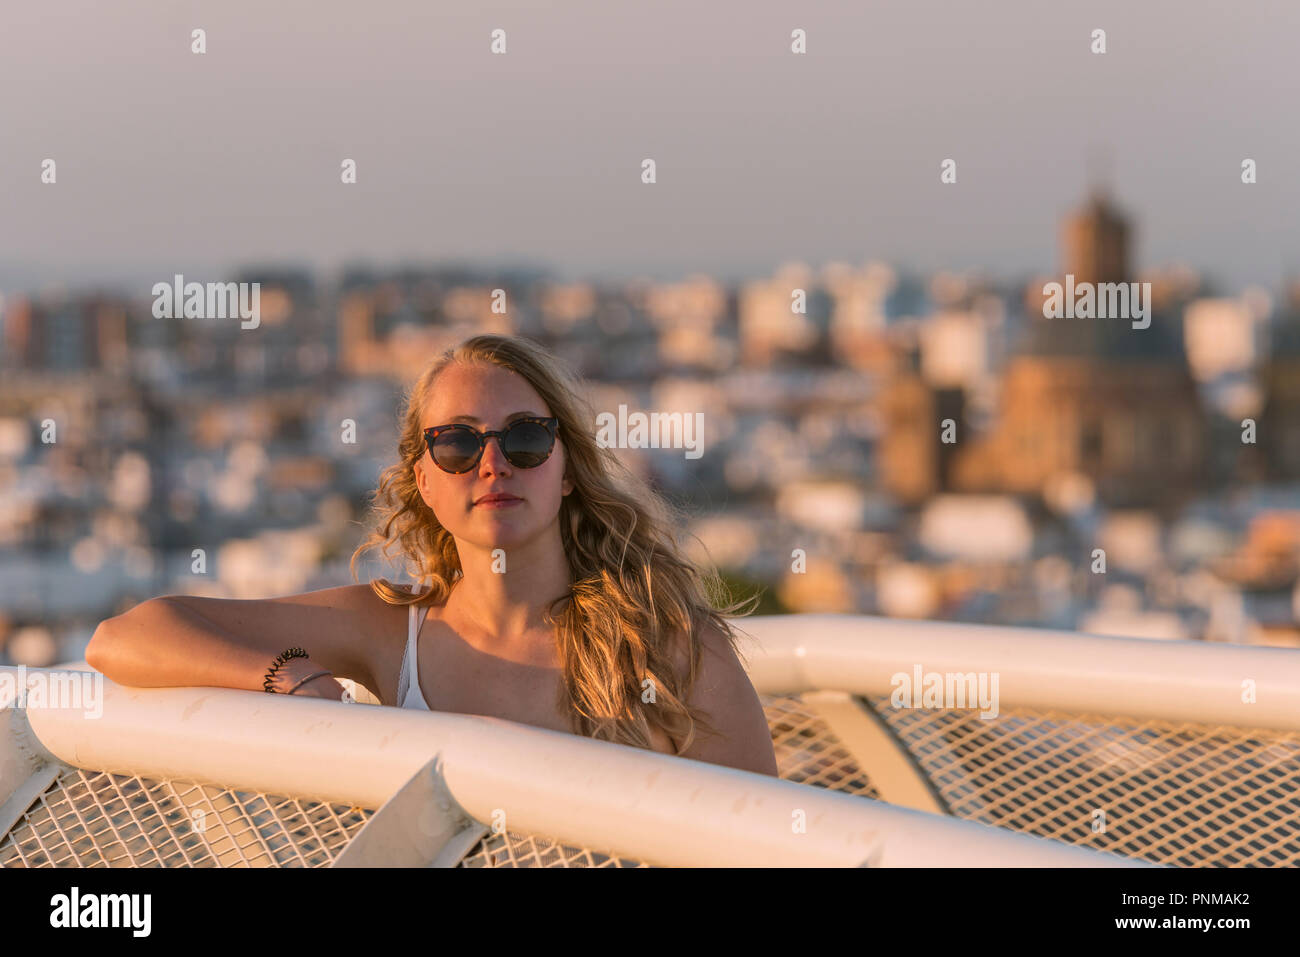 Young woman in sunglasses looks into the camera, Plaza de la Encarnacion, behind houses, Seville, Andalusia, Spain Stock Photo